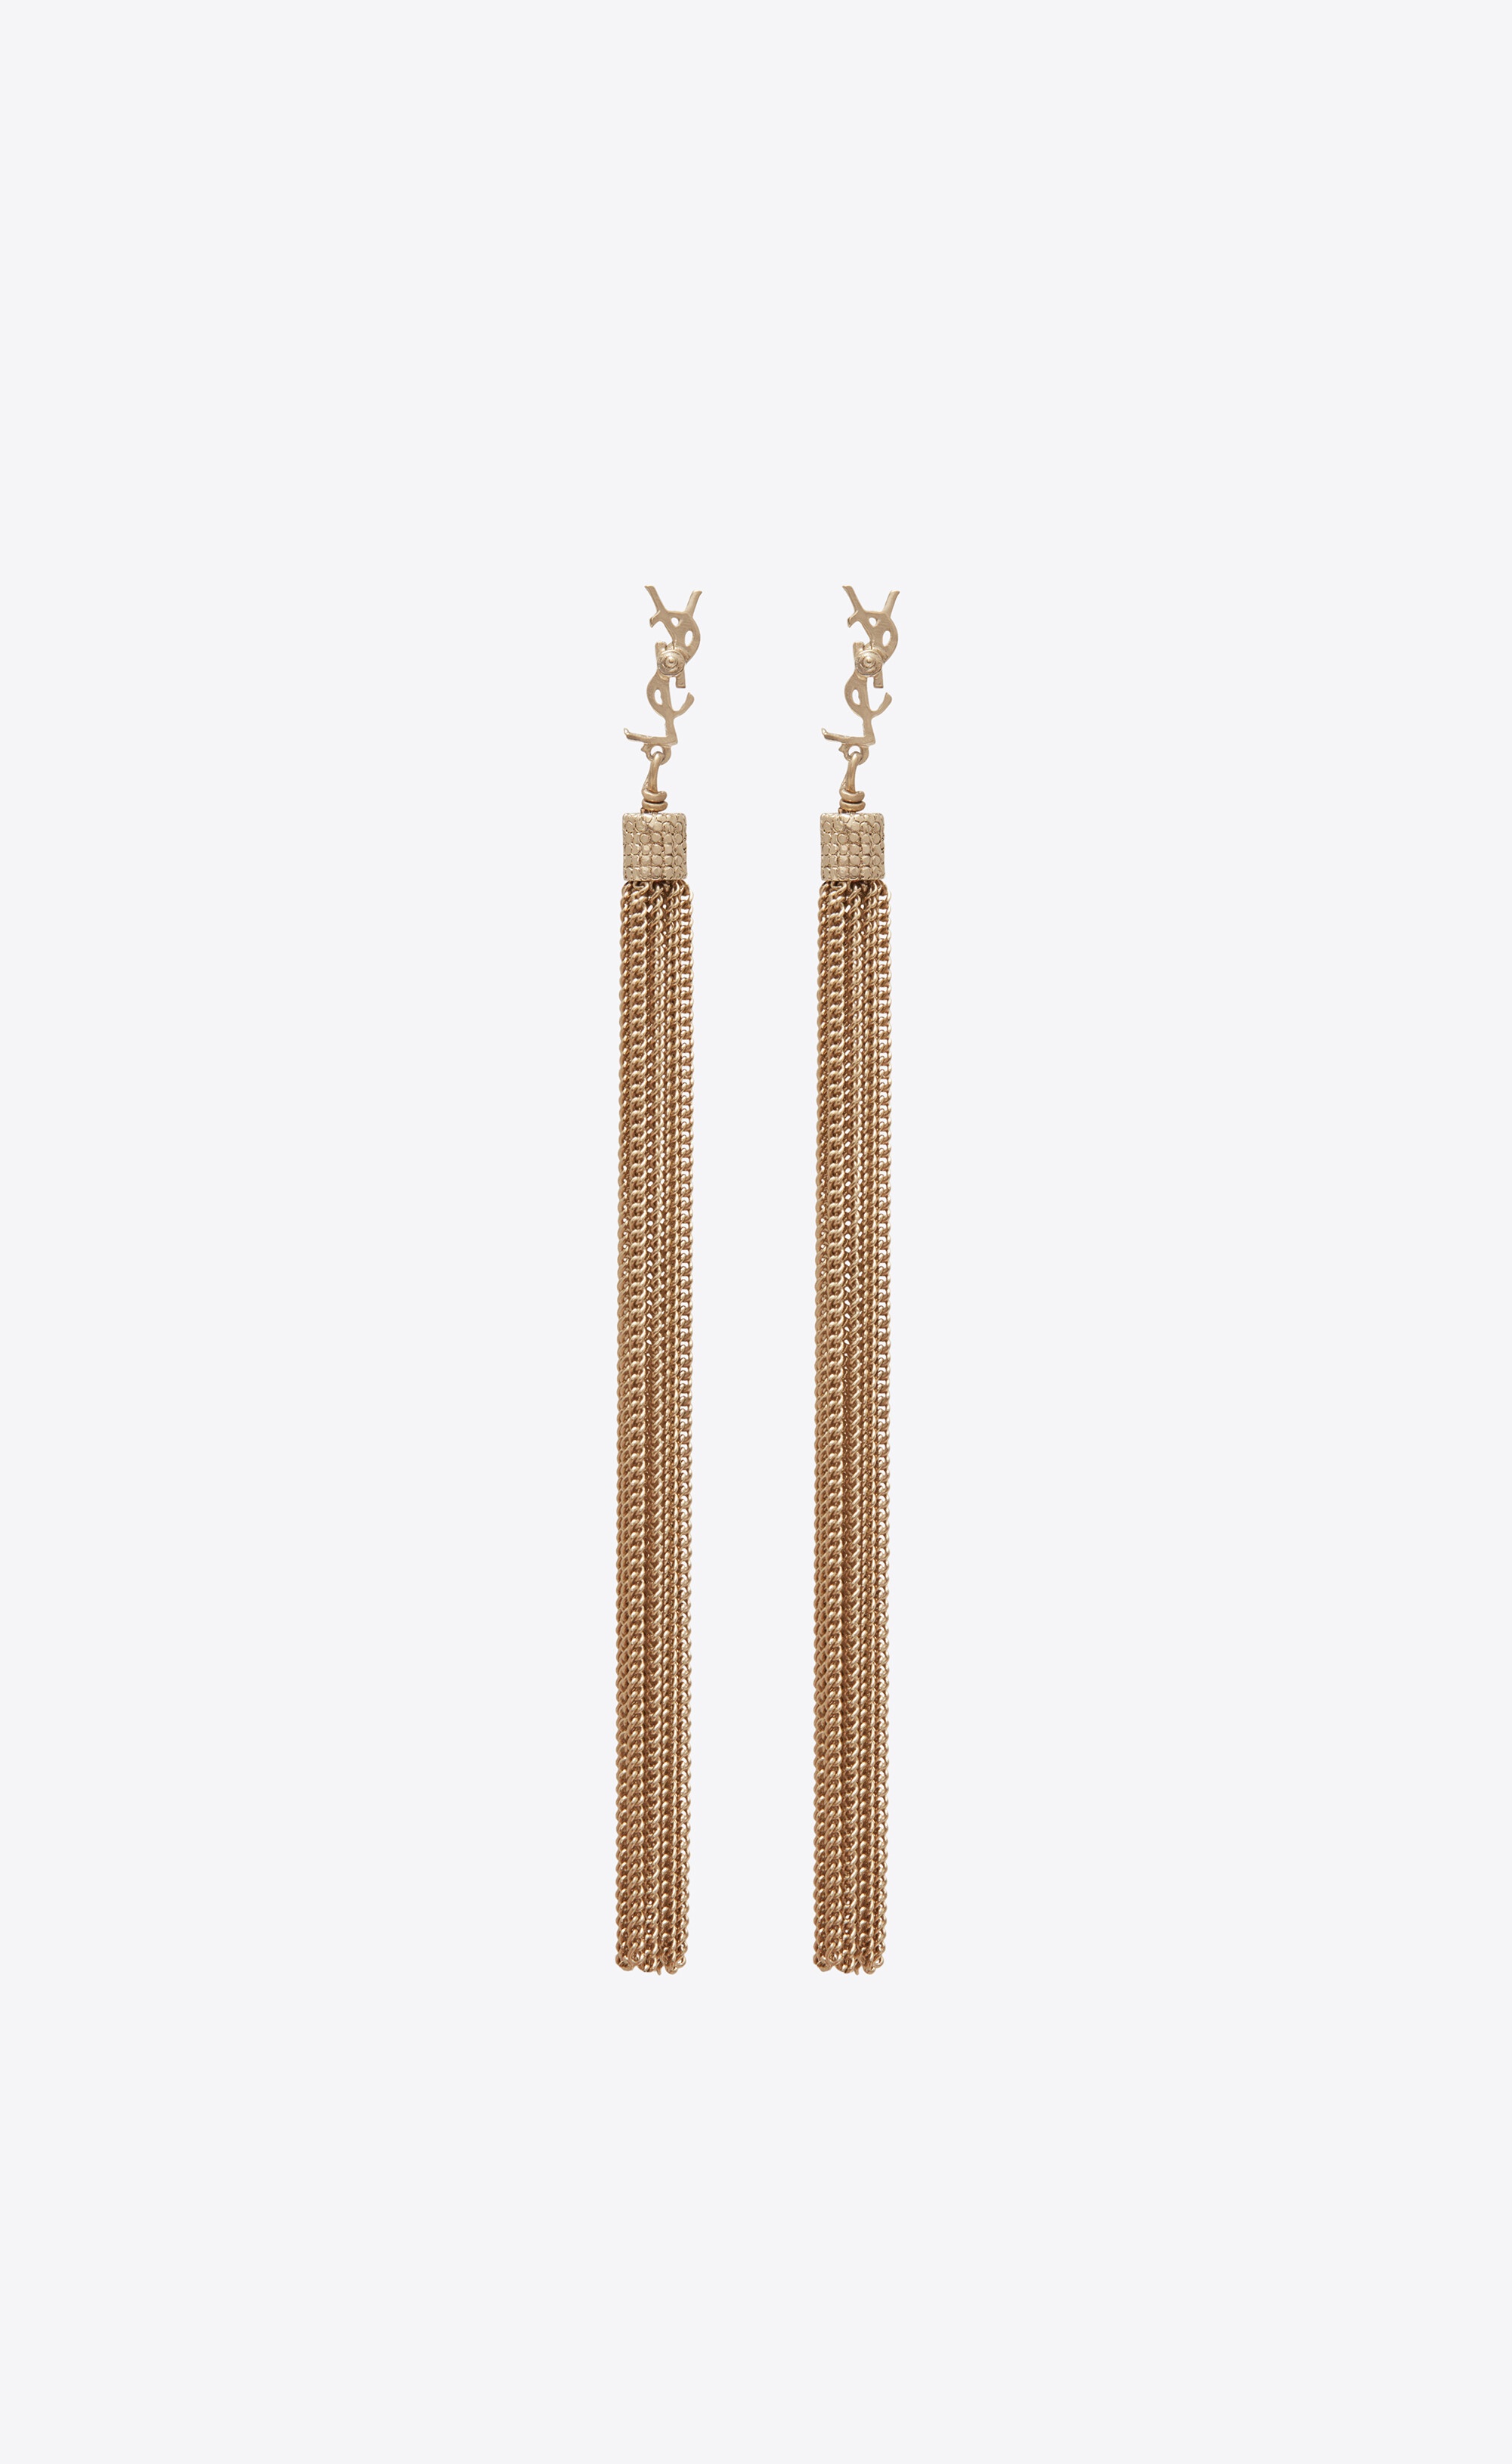 loulou earrings with chain tassels in light gold-colored brass - 2